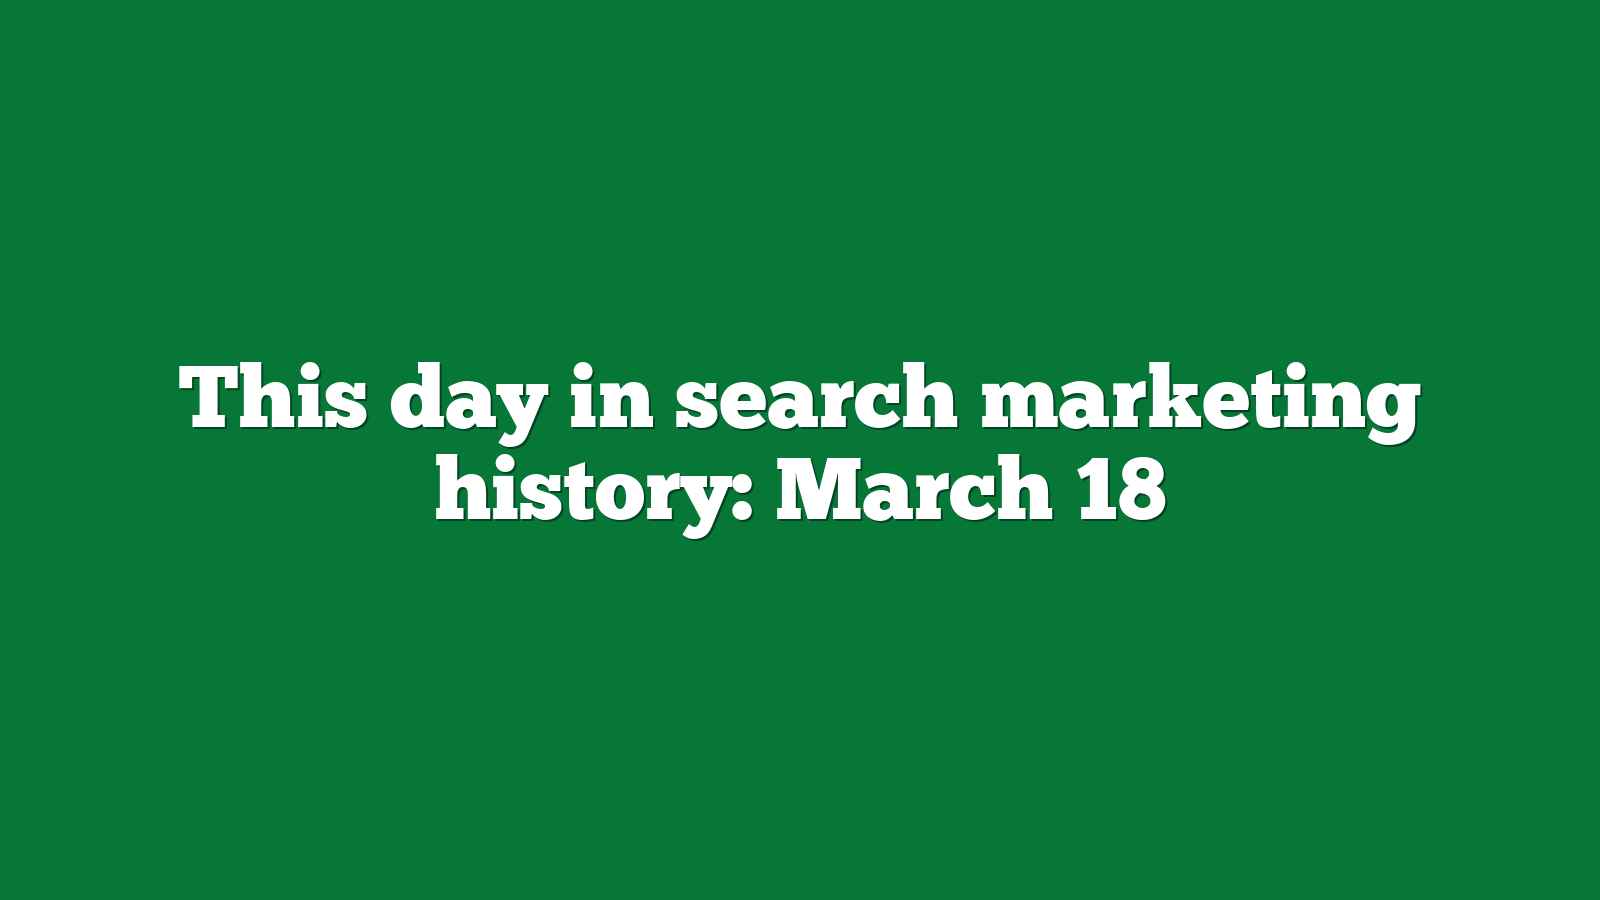 This day in search marketing history March 18